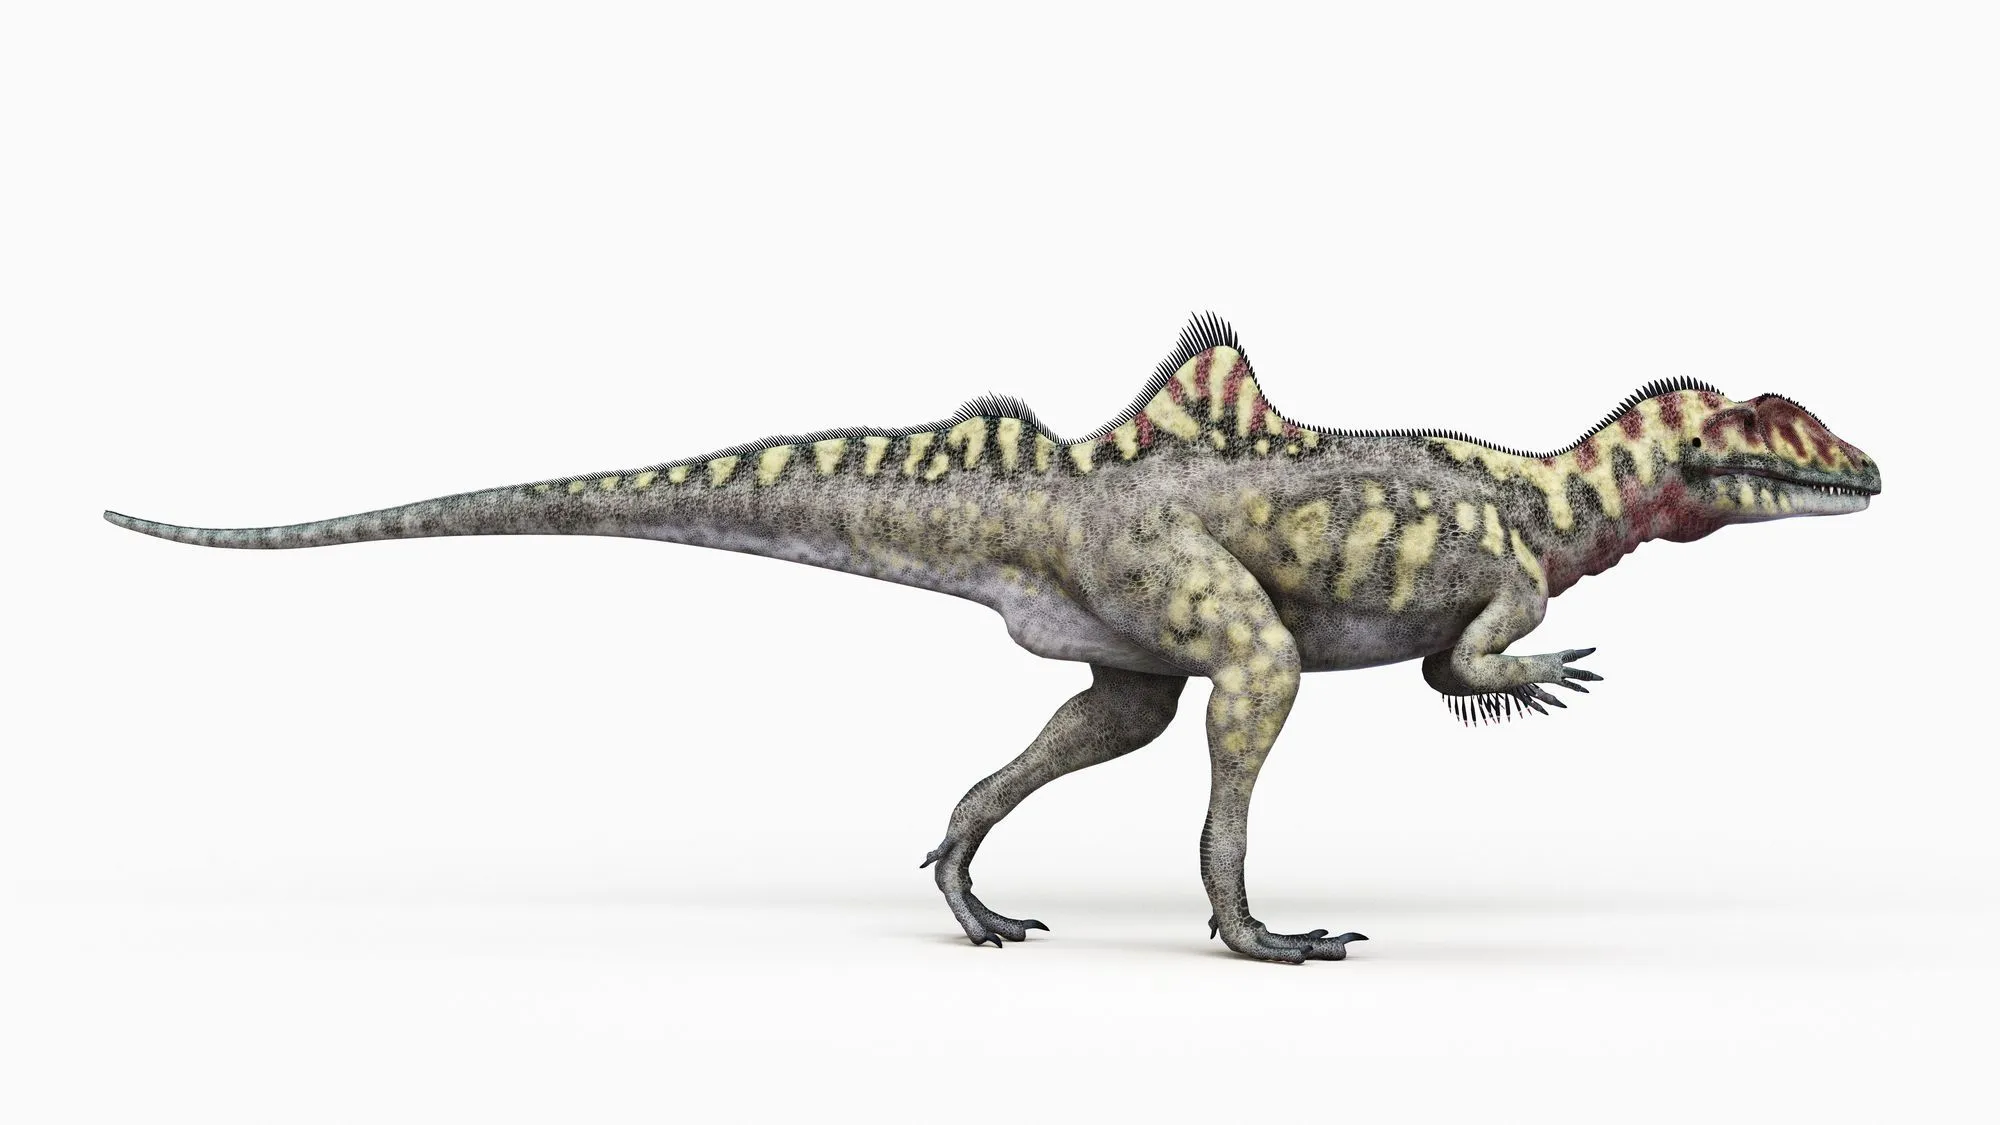 One Concavenator fact is that fossils of this dinosaur with a hump have been found in Spain.